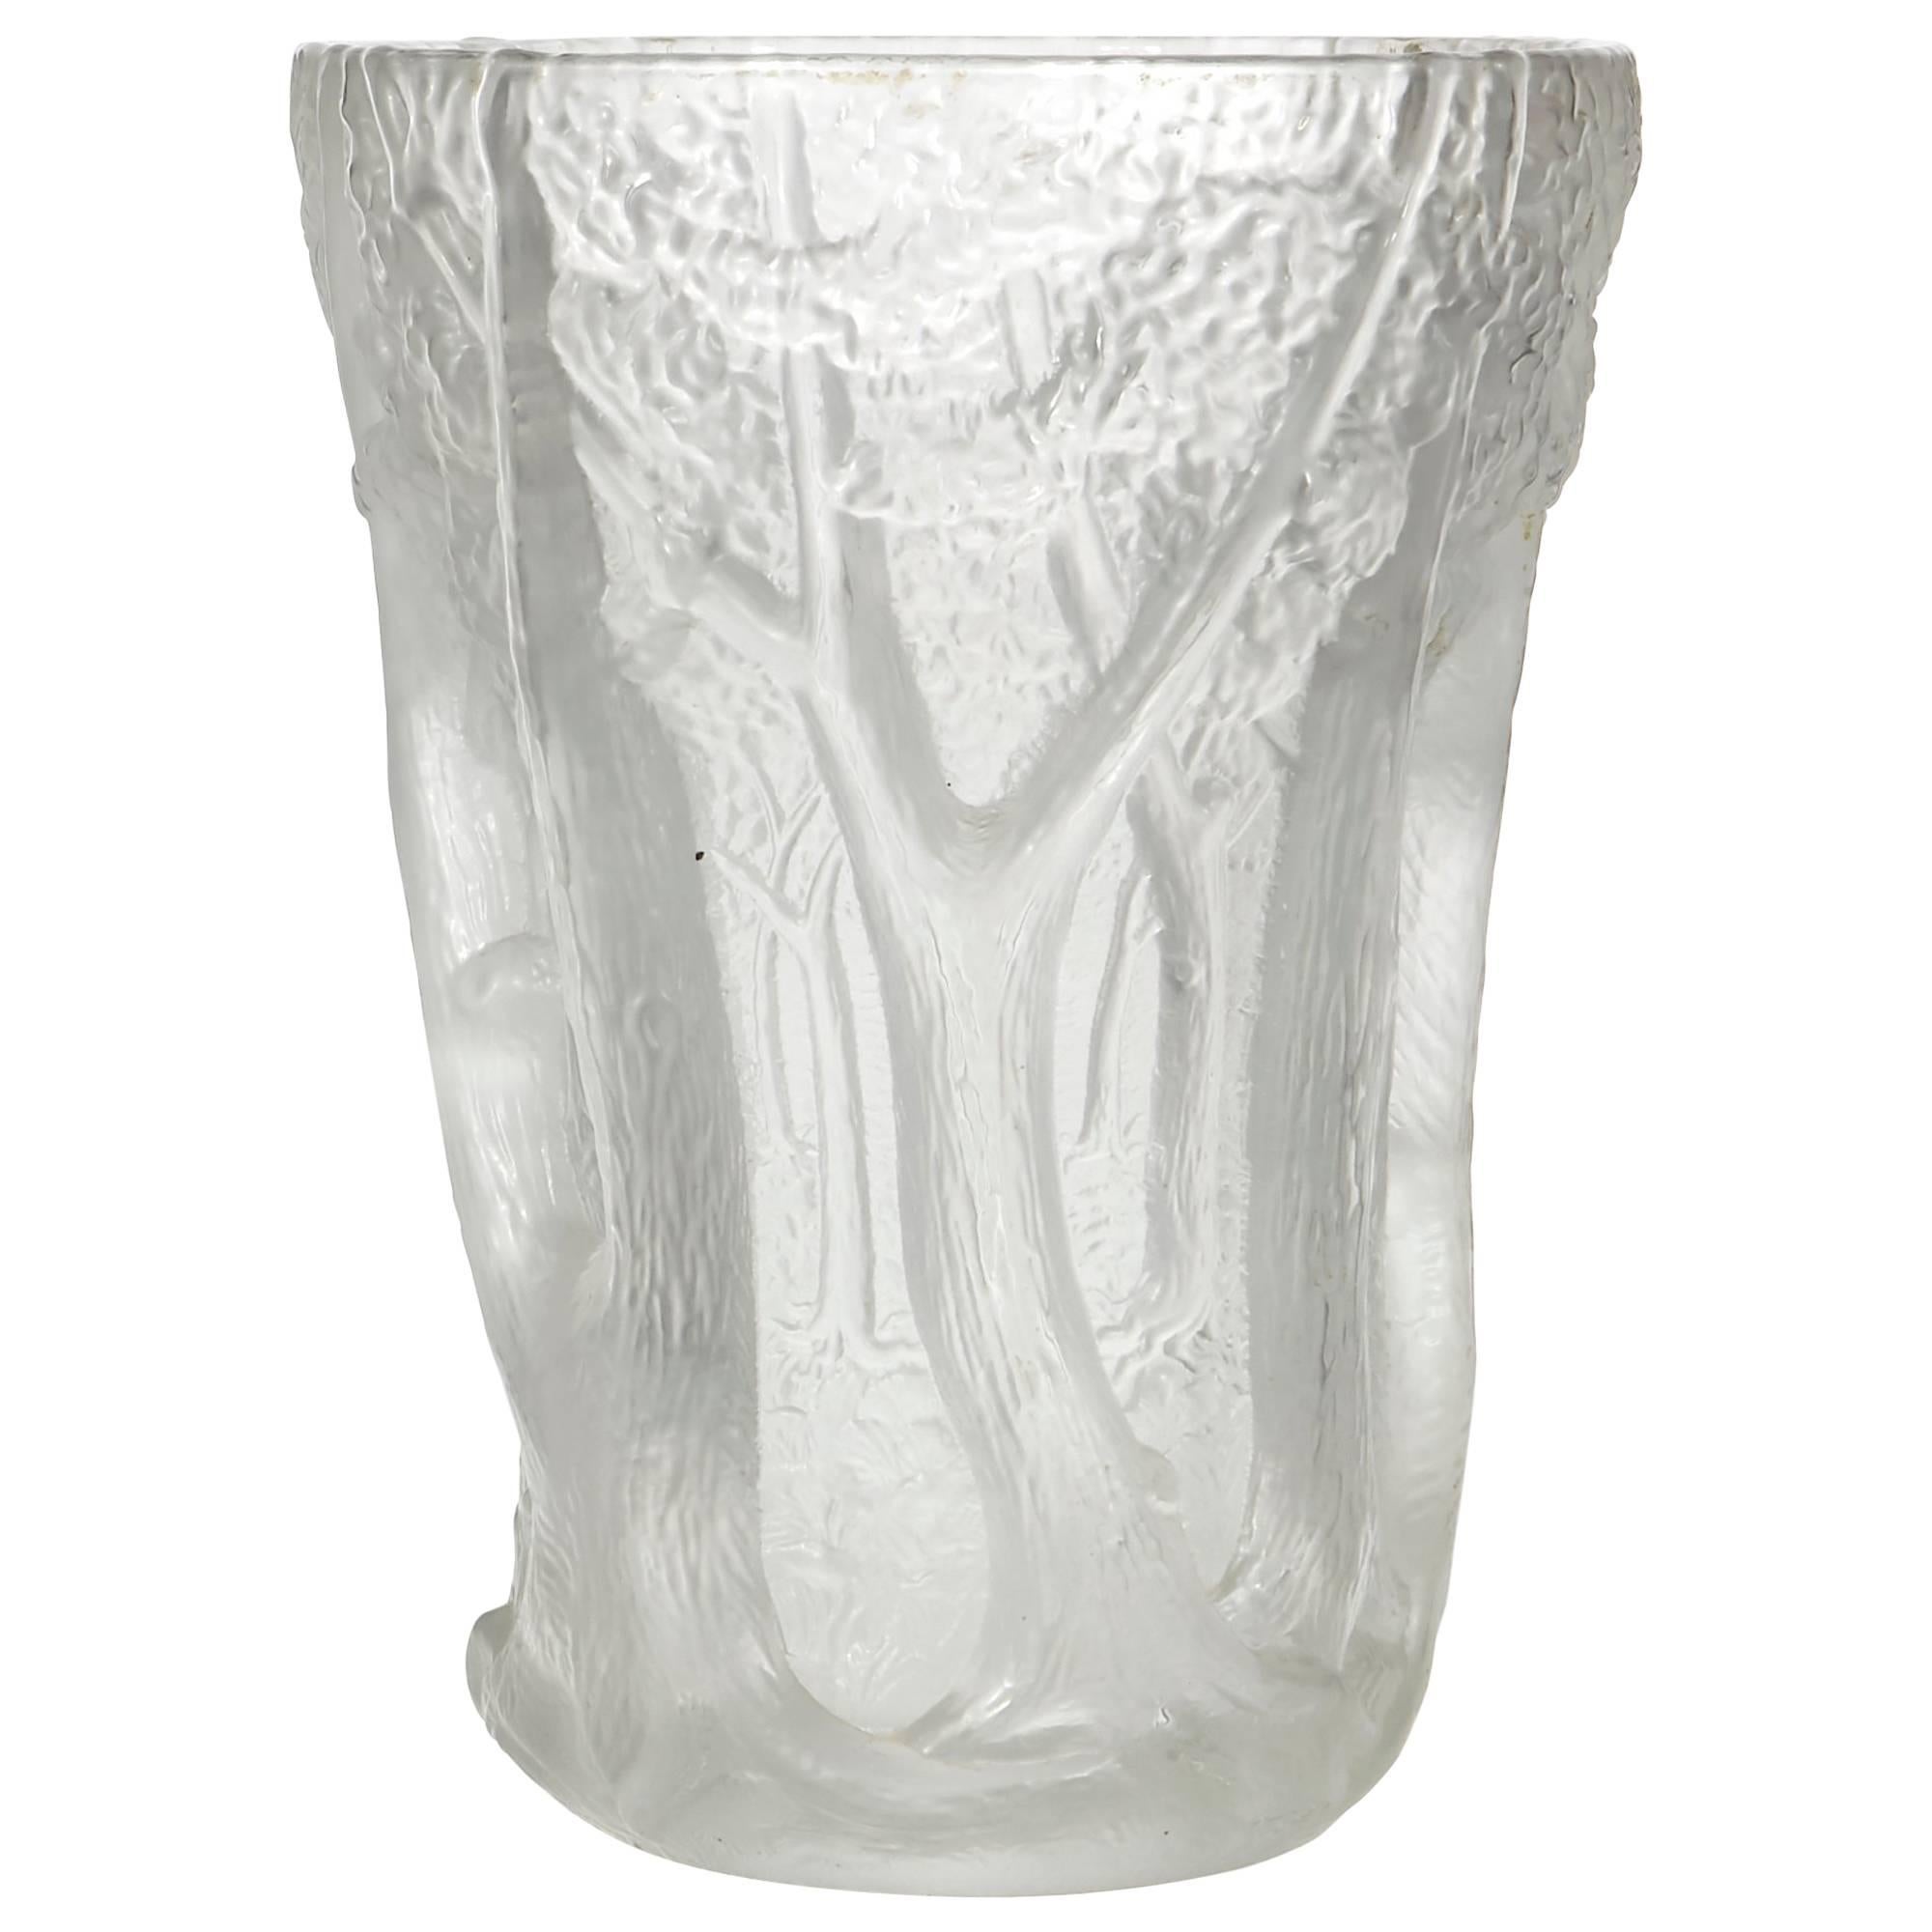 Czechoslovakian Josef Inwald Barolac Art Deco Frosted Glass Forest Vase For Sale